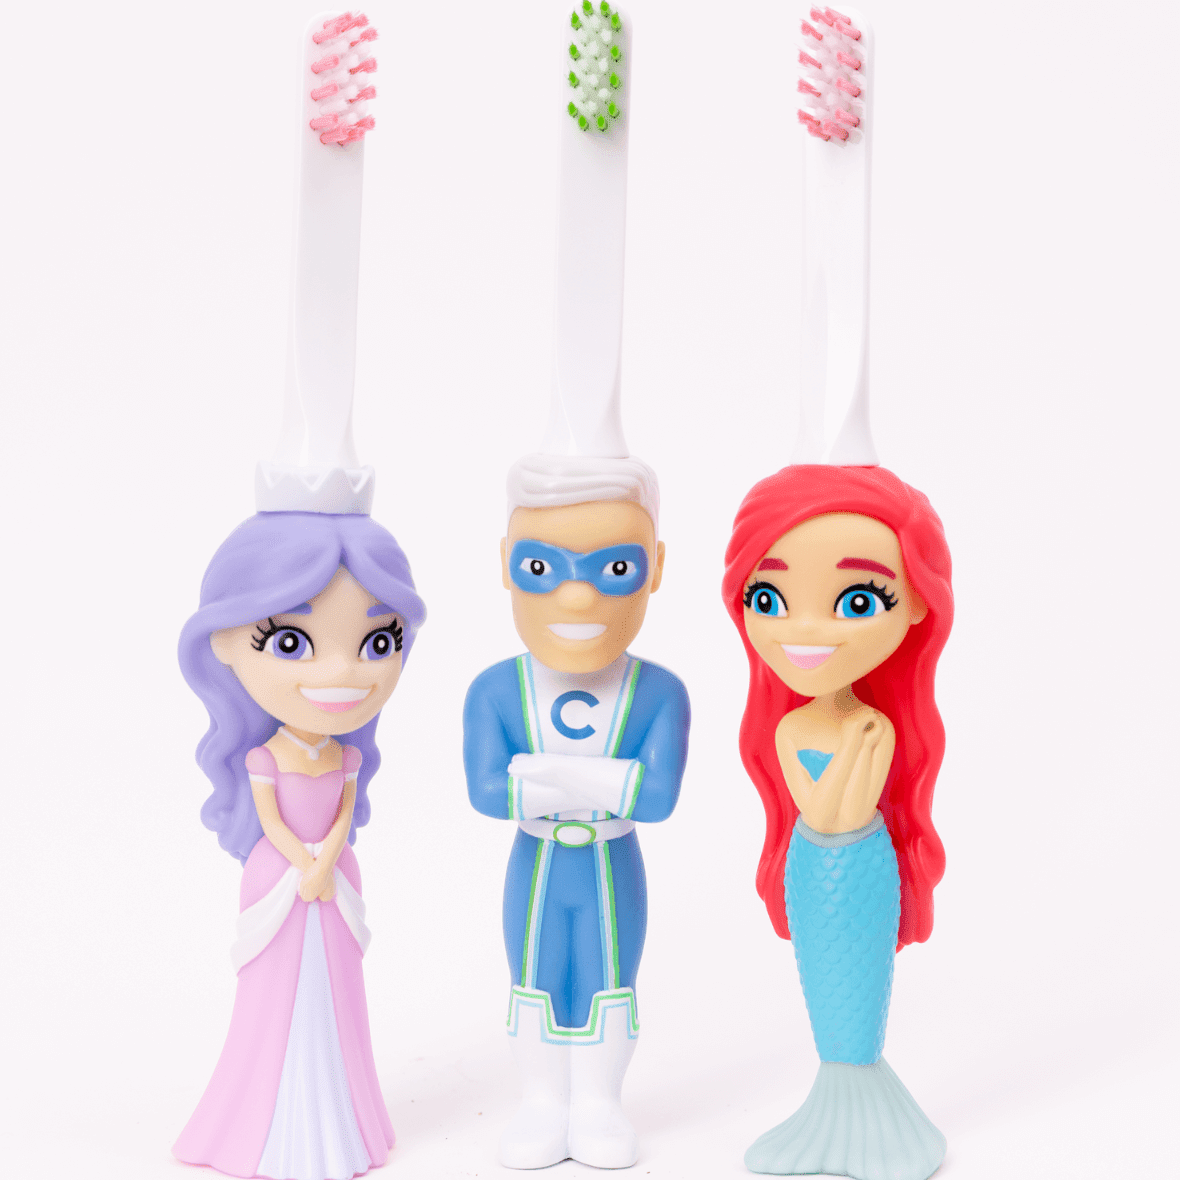 Collection of toothbrushes featuring Aqua the Mermaid, princess, and superhero designs